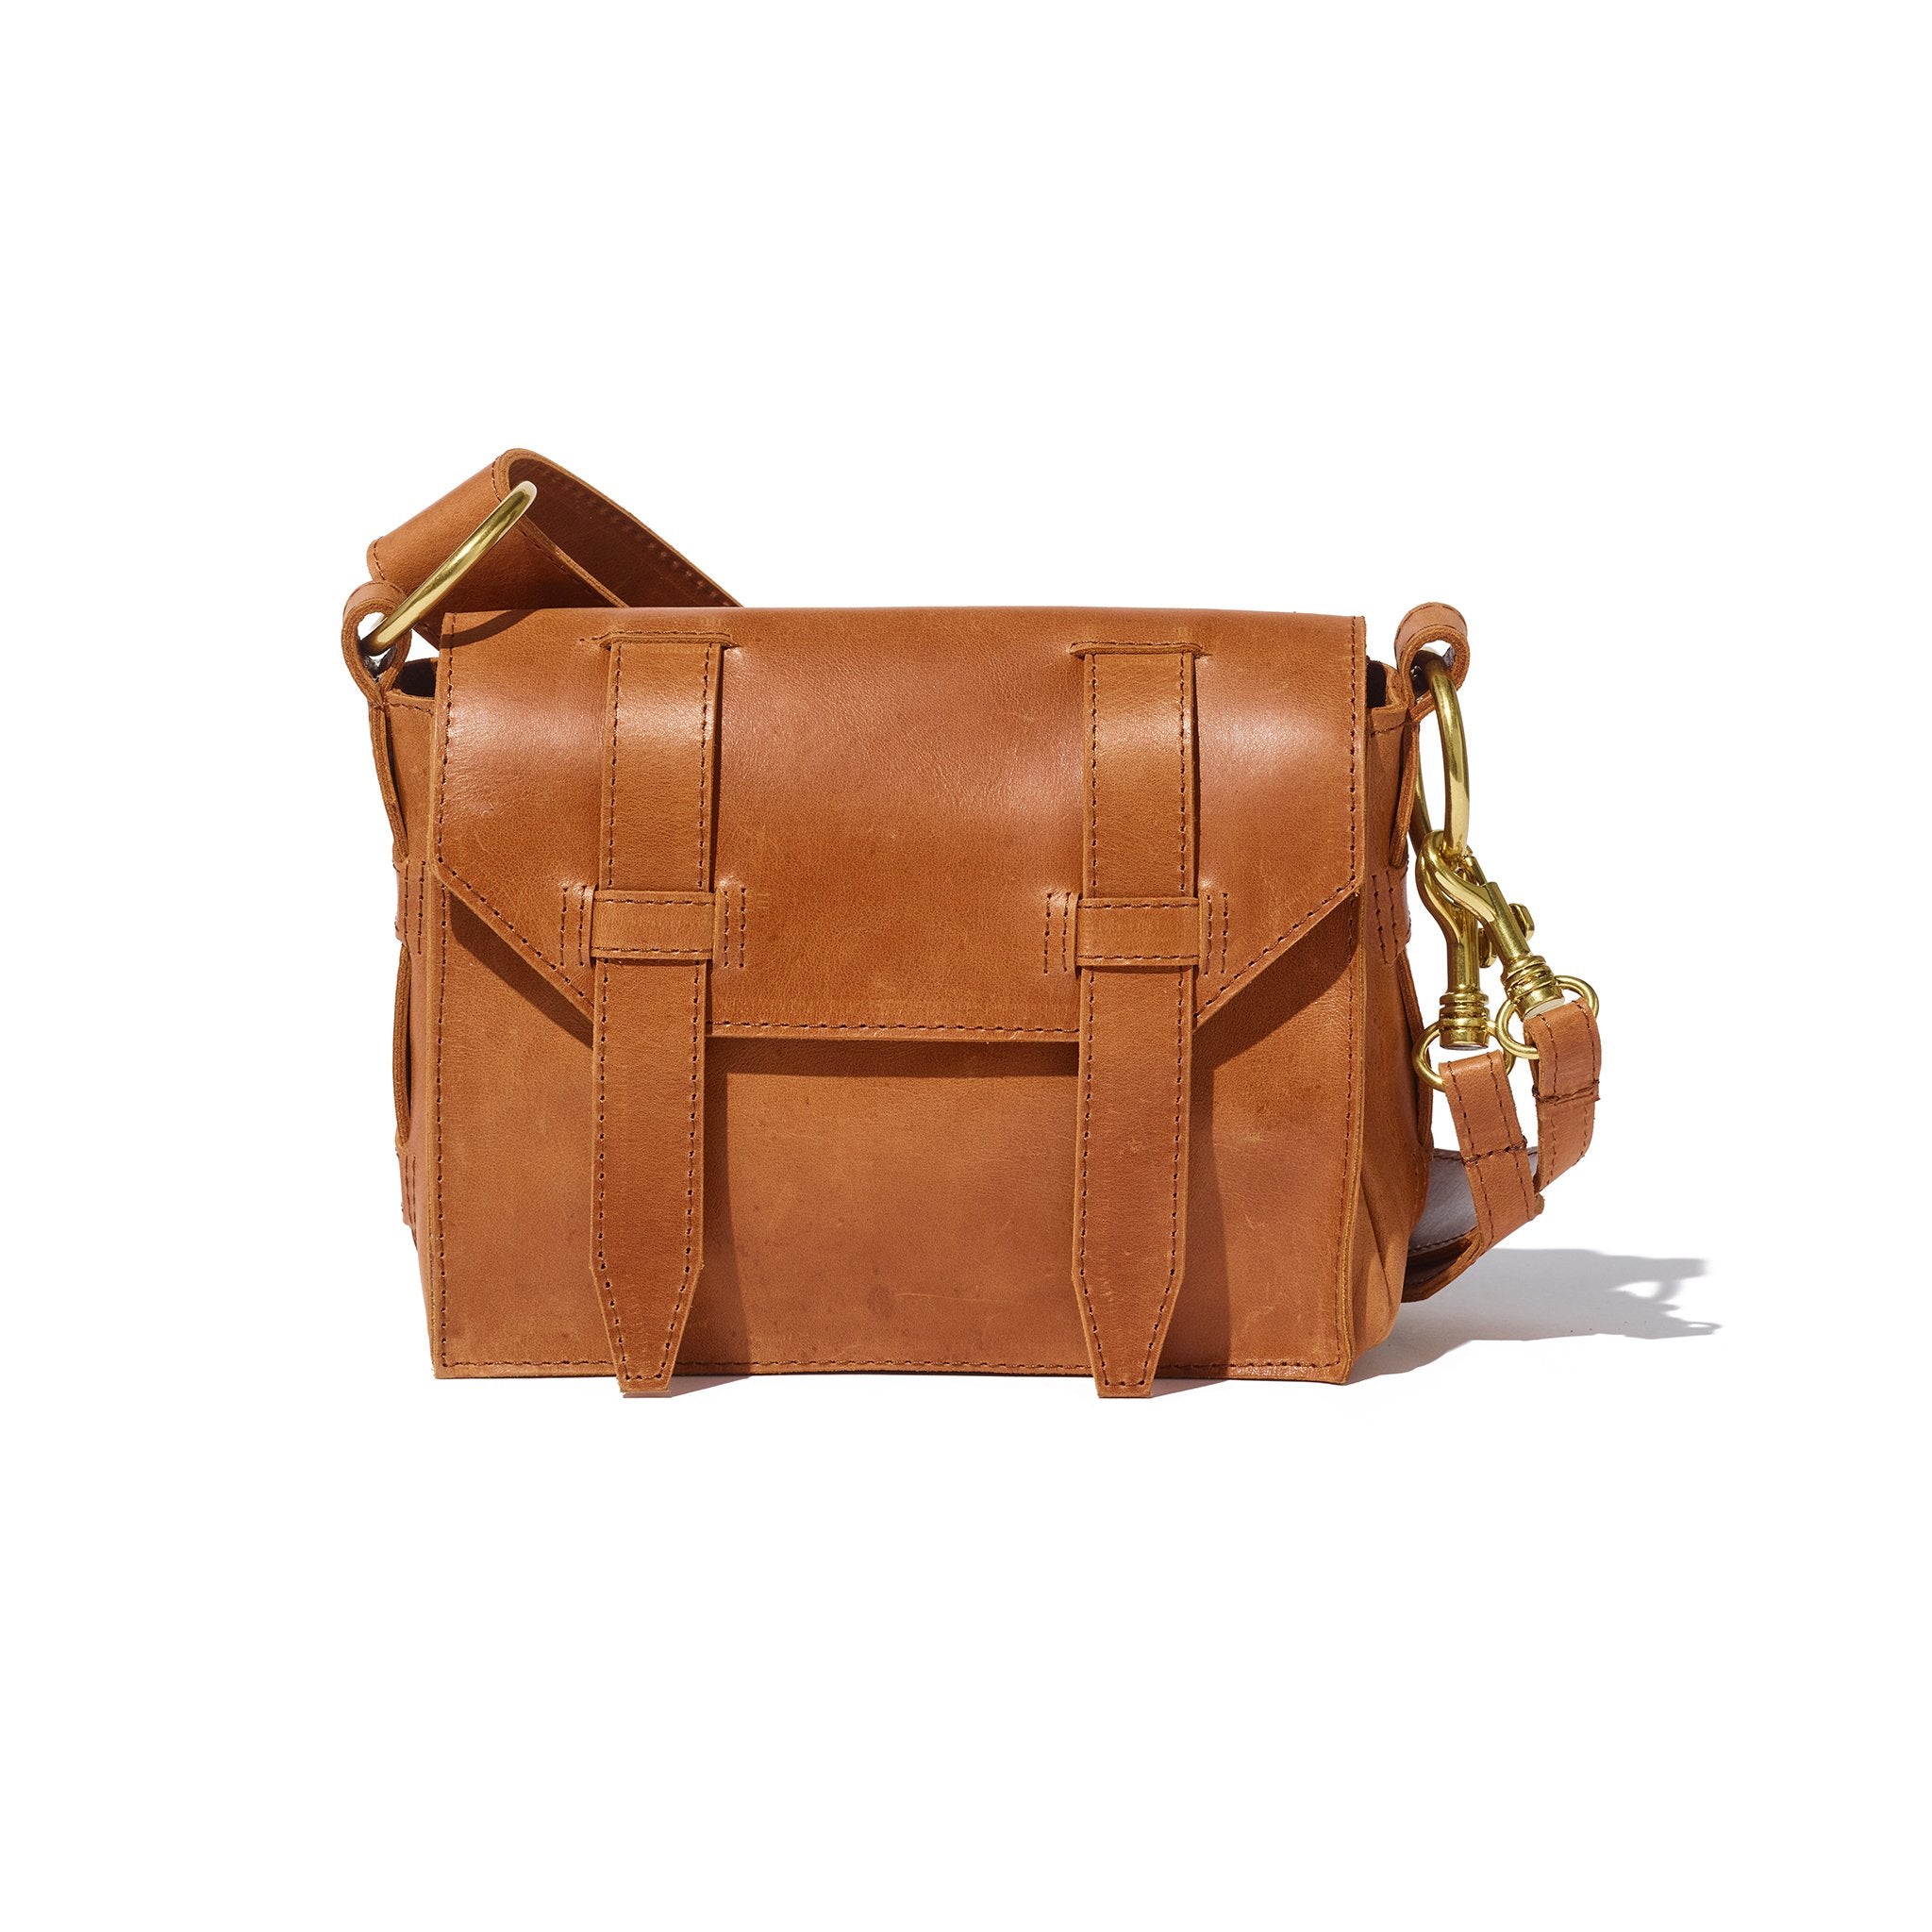 A versatile brown crossbody bag handcrafted from sustainable leather, lined with hand-loomed cotton, that features a removable strap and an interior card slot.